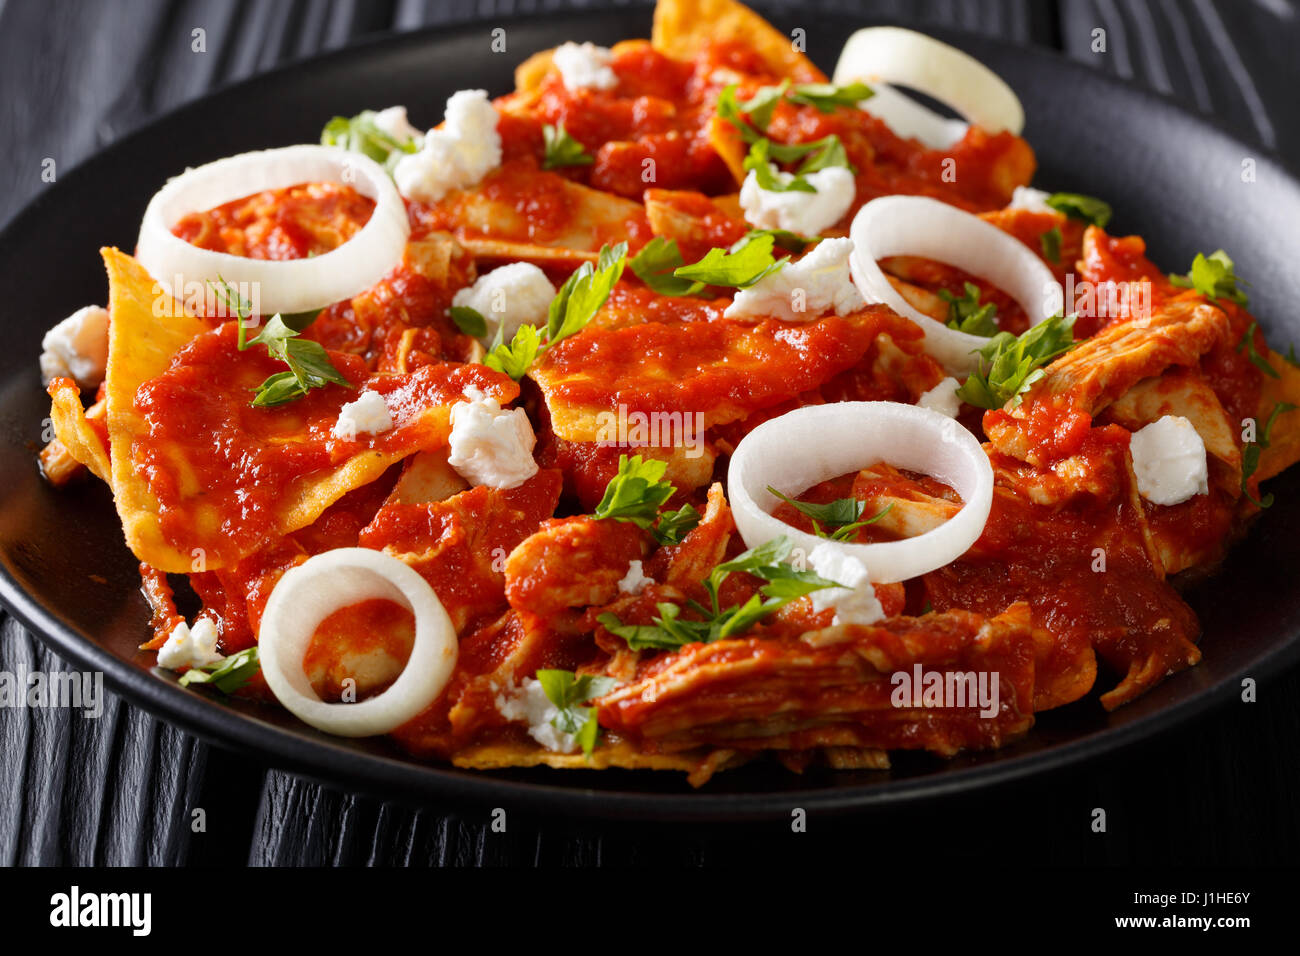 Delicious mexican food: nachos with tomato salsa, chicken and cheese close-up on a plate. horizontal Stock Photo